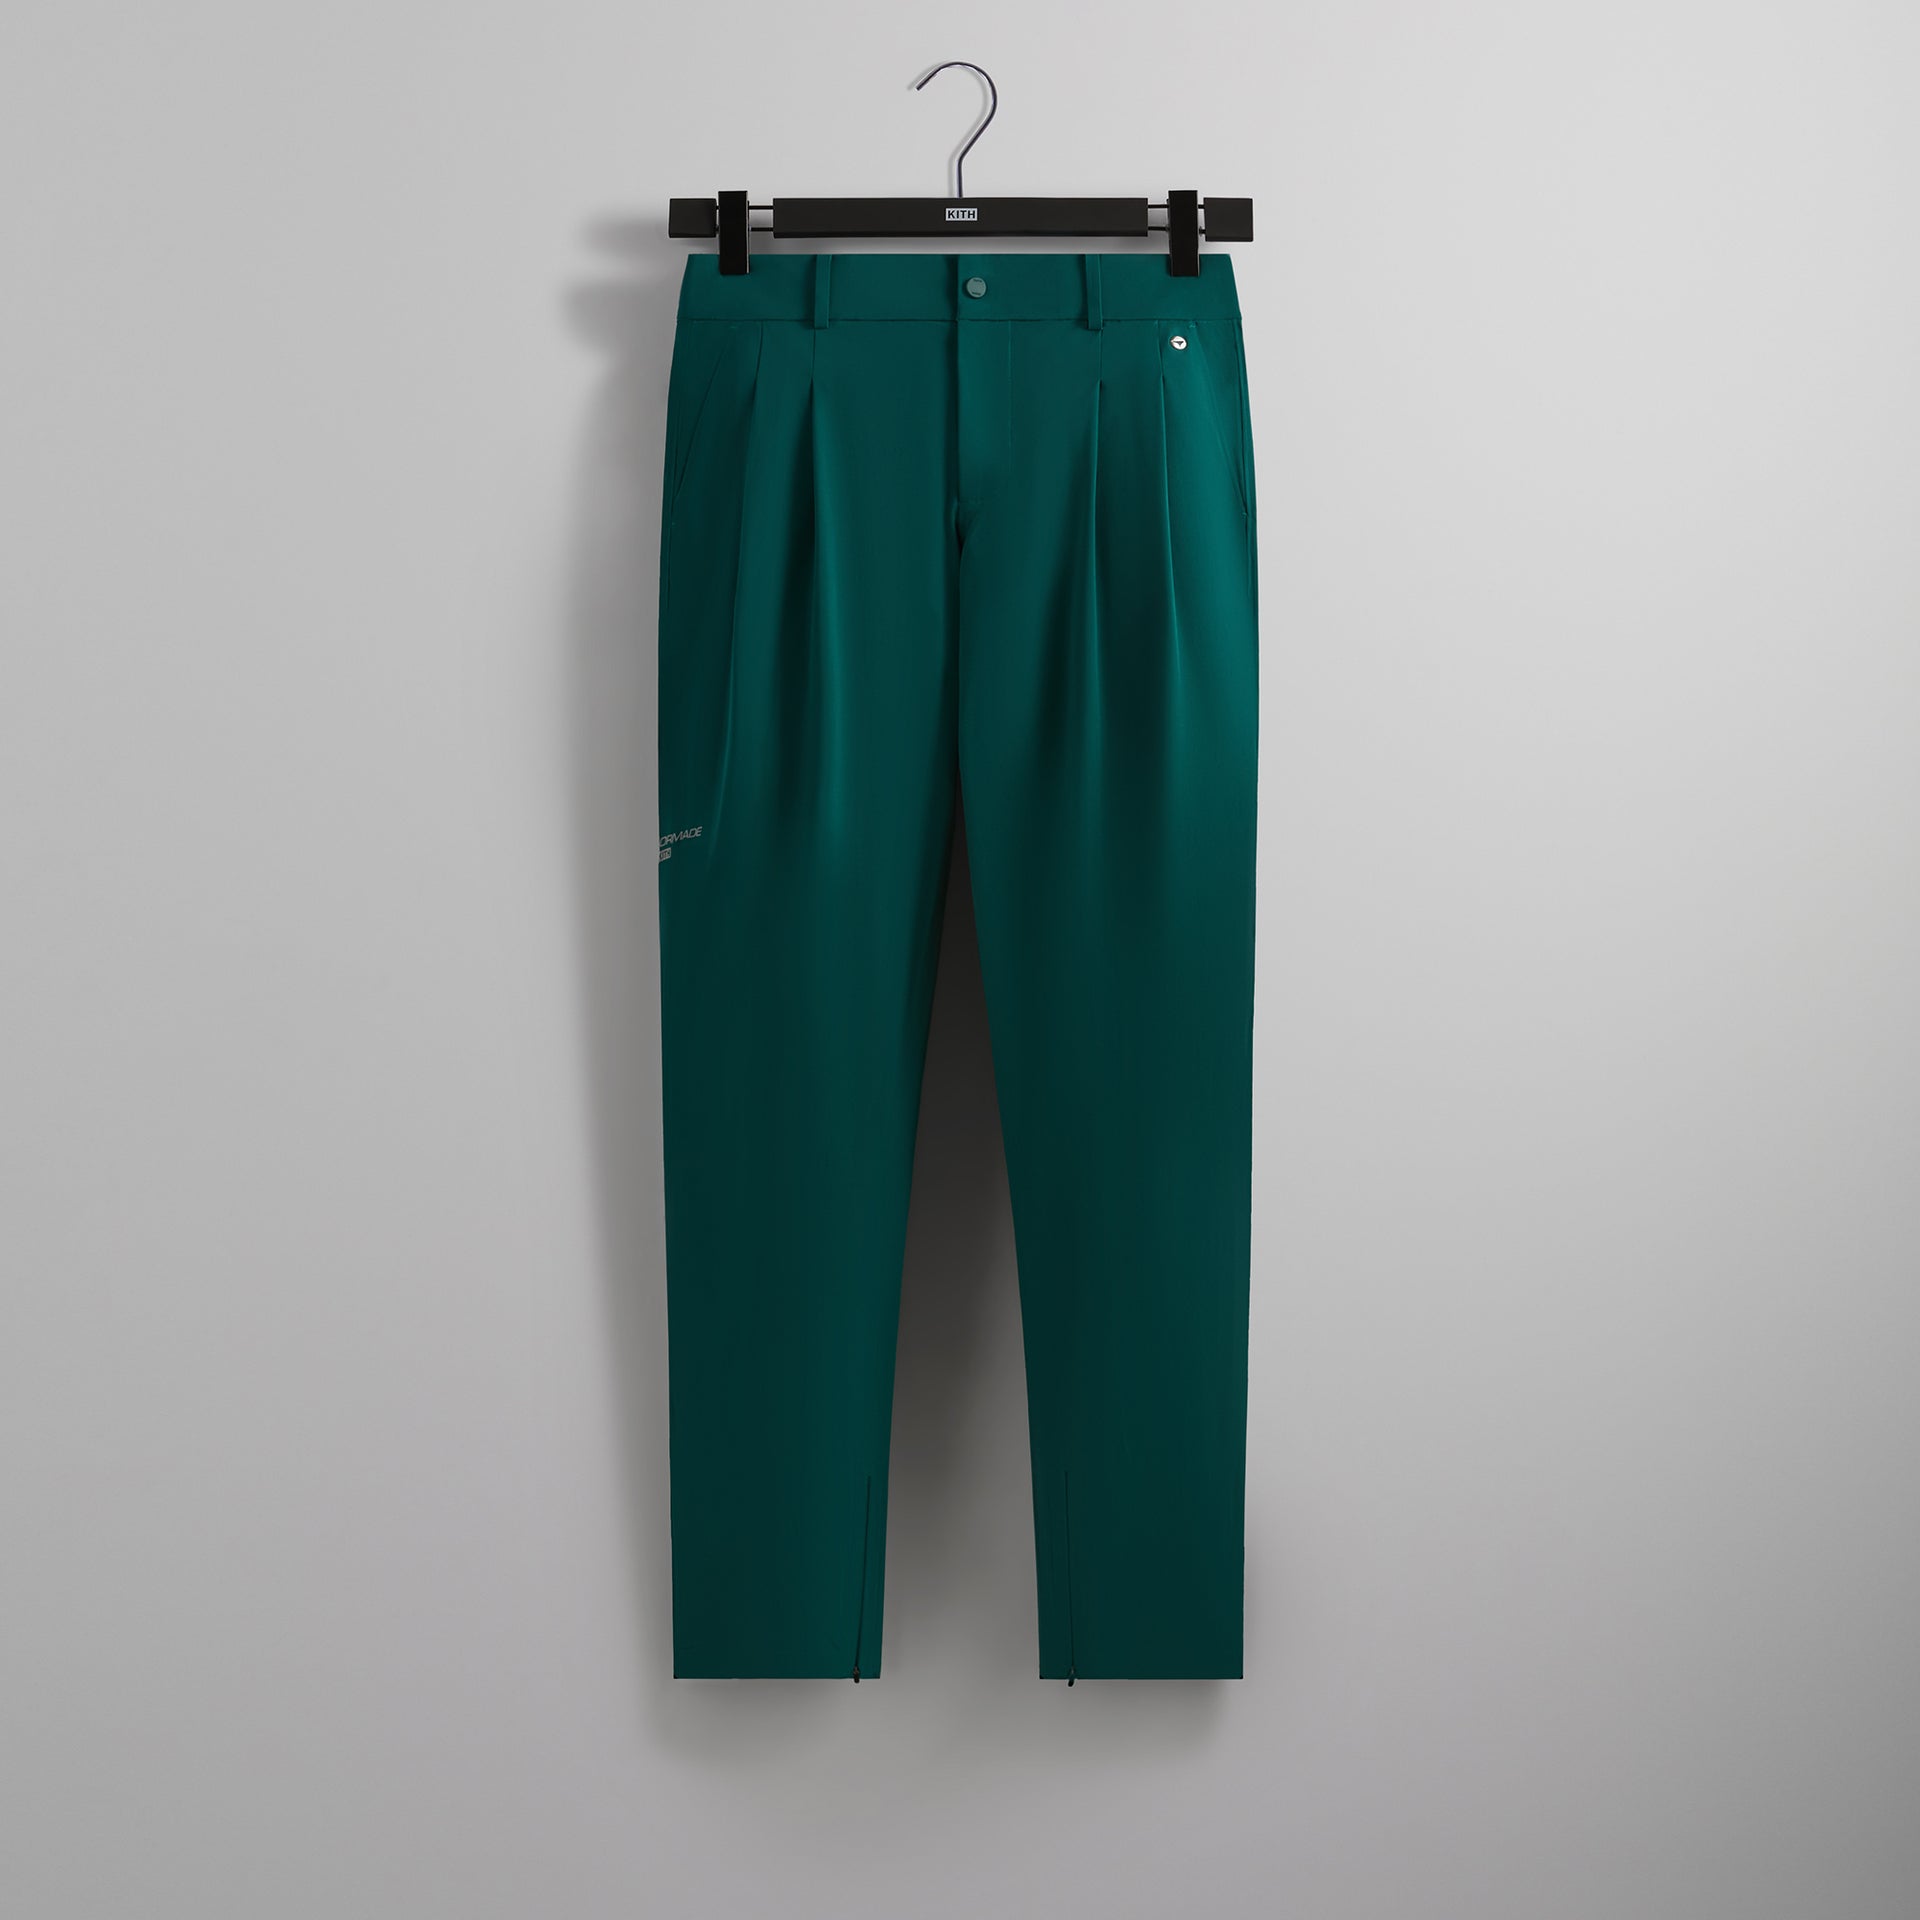 Kith for TaylorMade Mallet Pant - Fairway PH